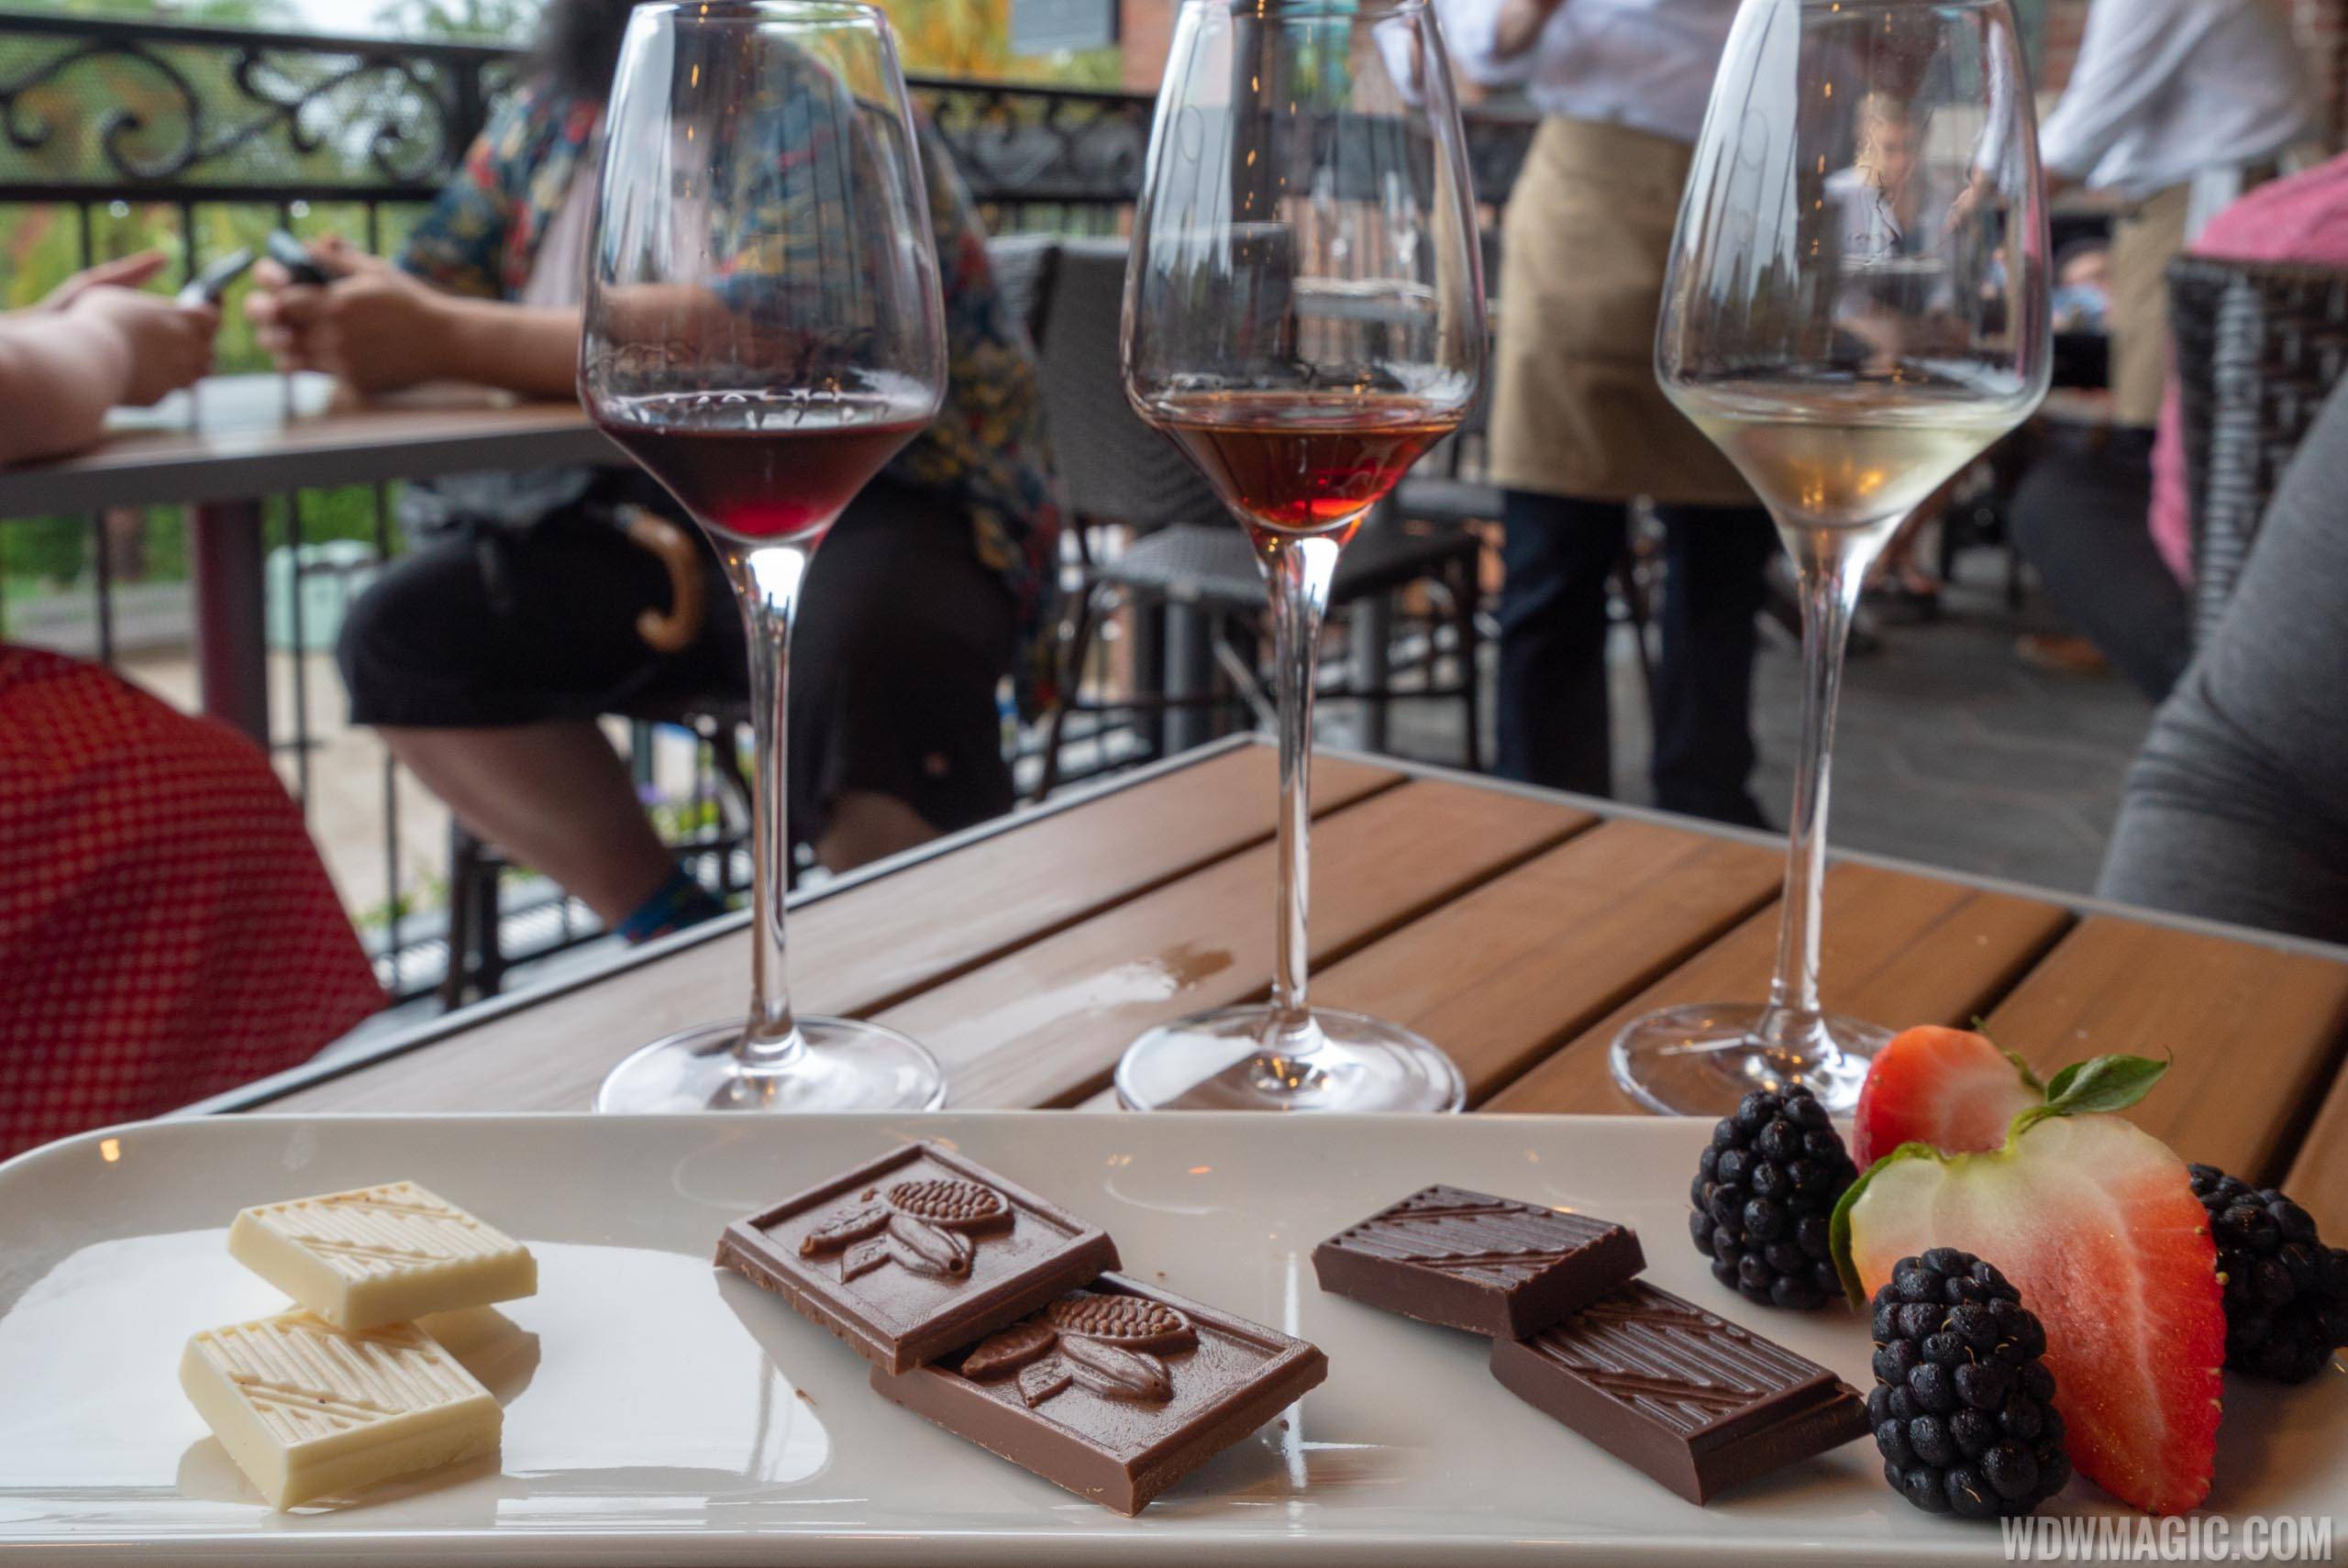 Wine Bar George - The Chocolate Experience with 3 1oz wine pairings $22